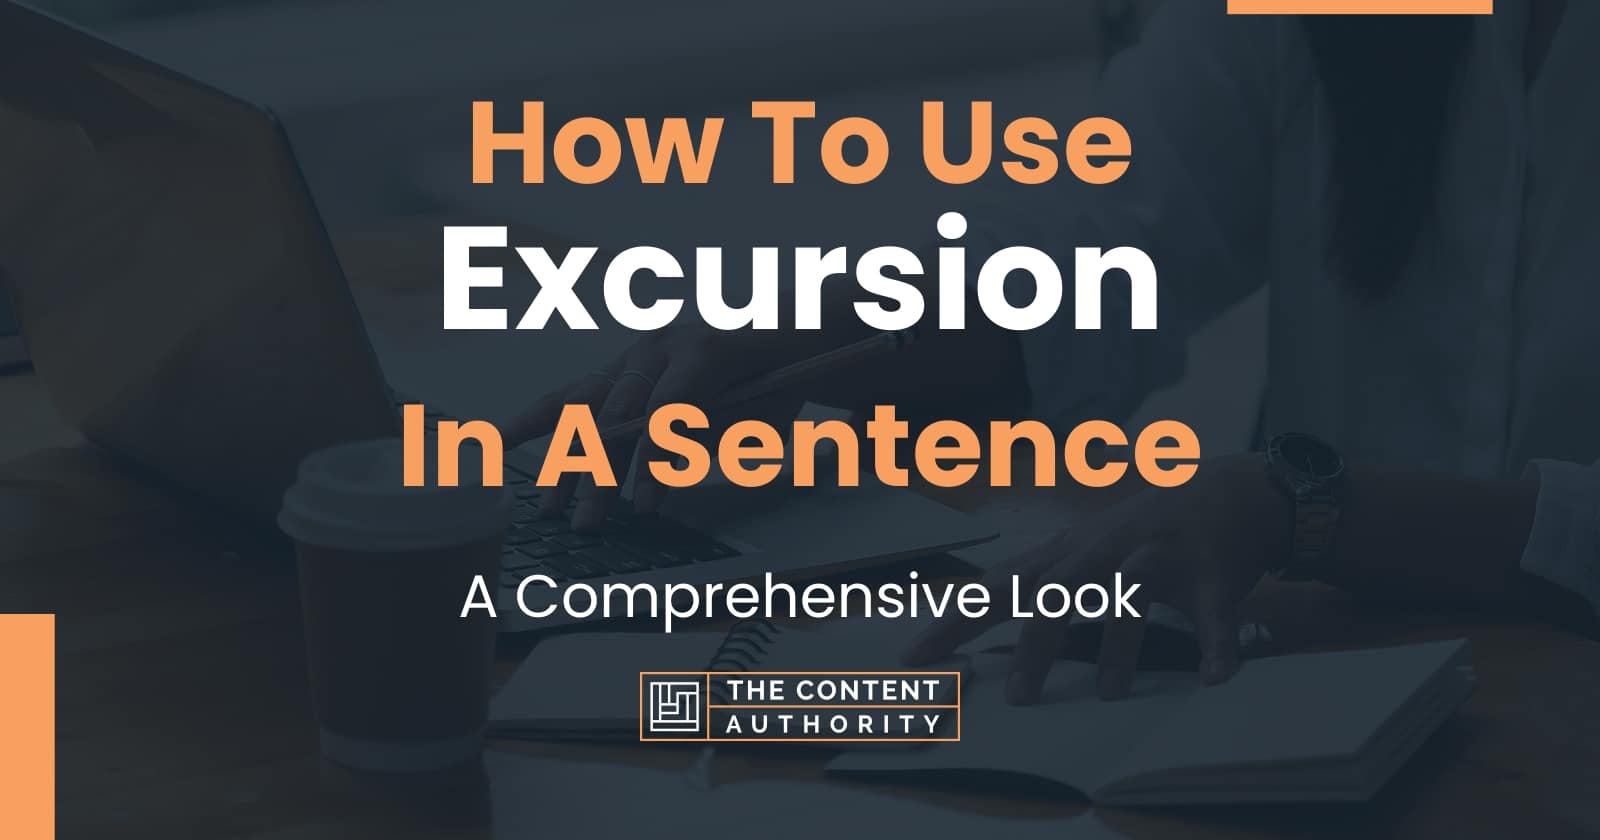 excursion in a sentence easy